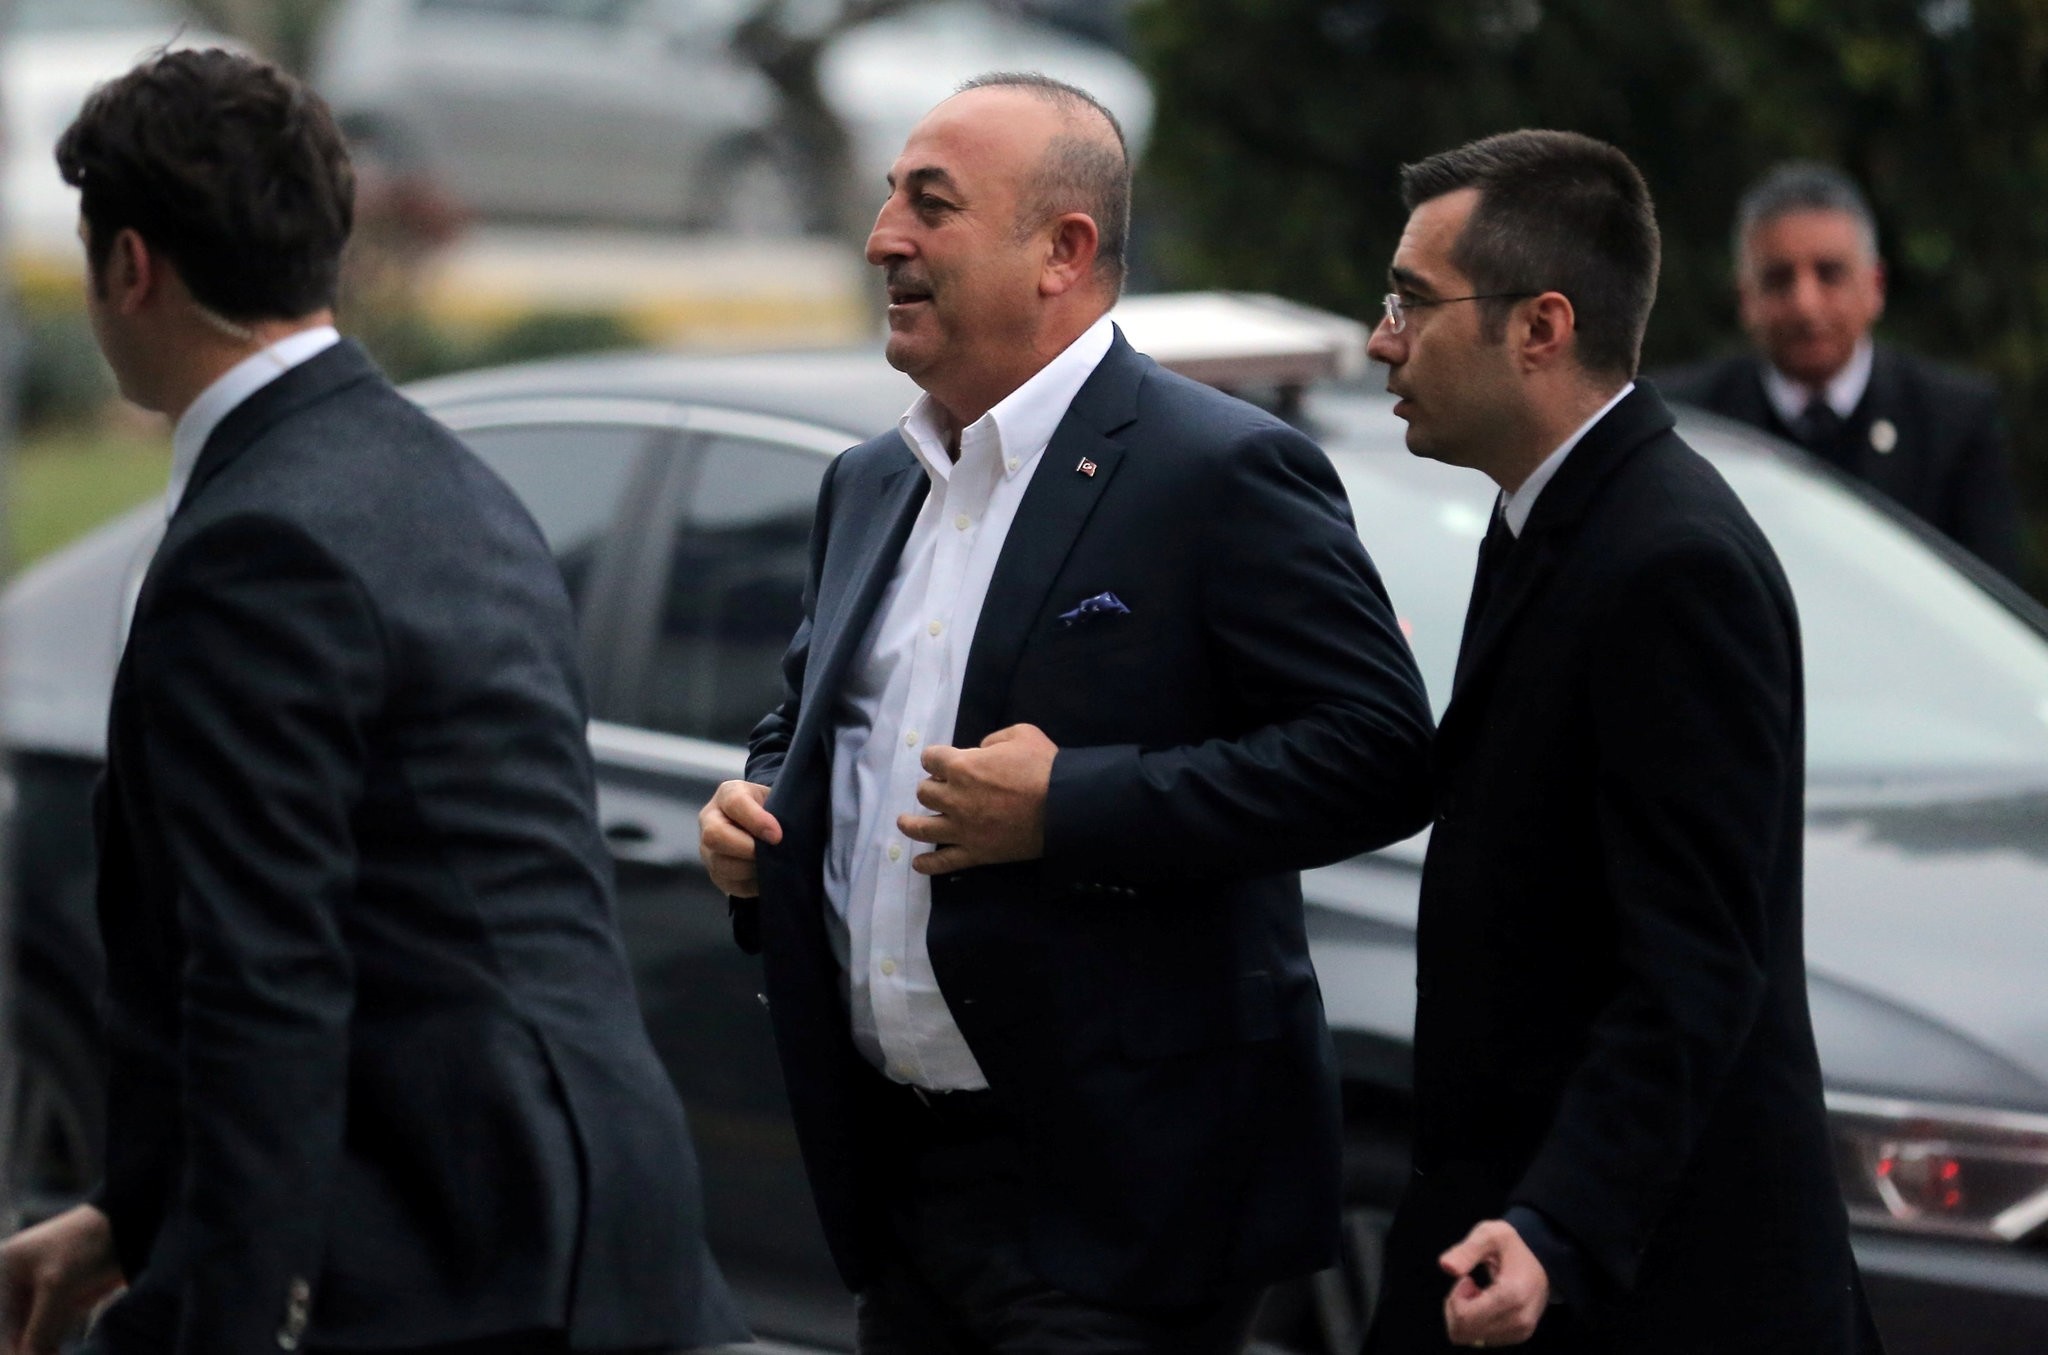 Turkish Foreign Minister Mevlut Cavusoglu arrives for a news conference at Ataturk International airport in Istanbul, Turkey, March 11, 2017. (REUTERS Photo)